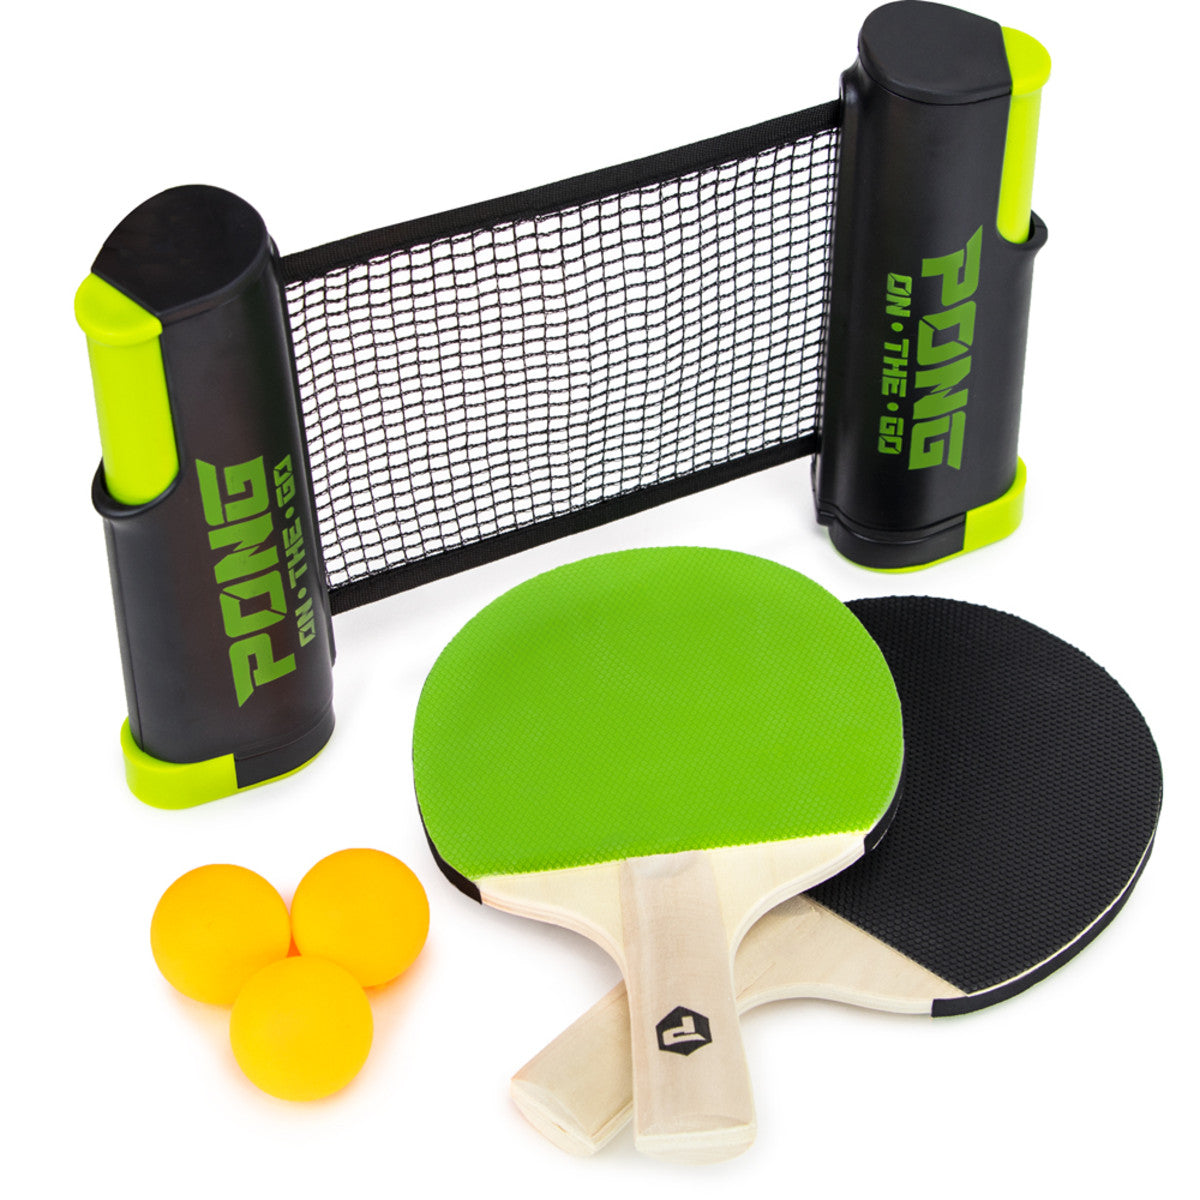 A partially-furled ping-pong net, two paddles, and three ping-pong balls